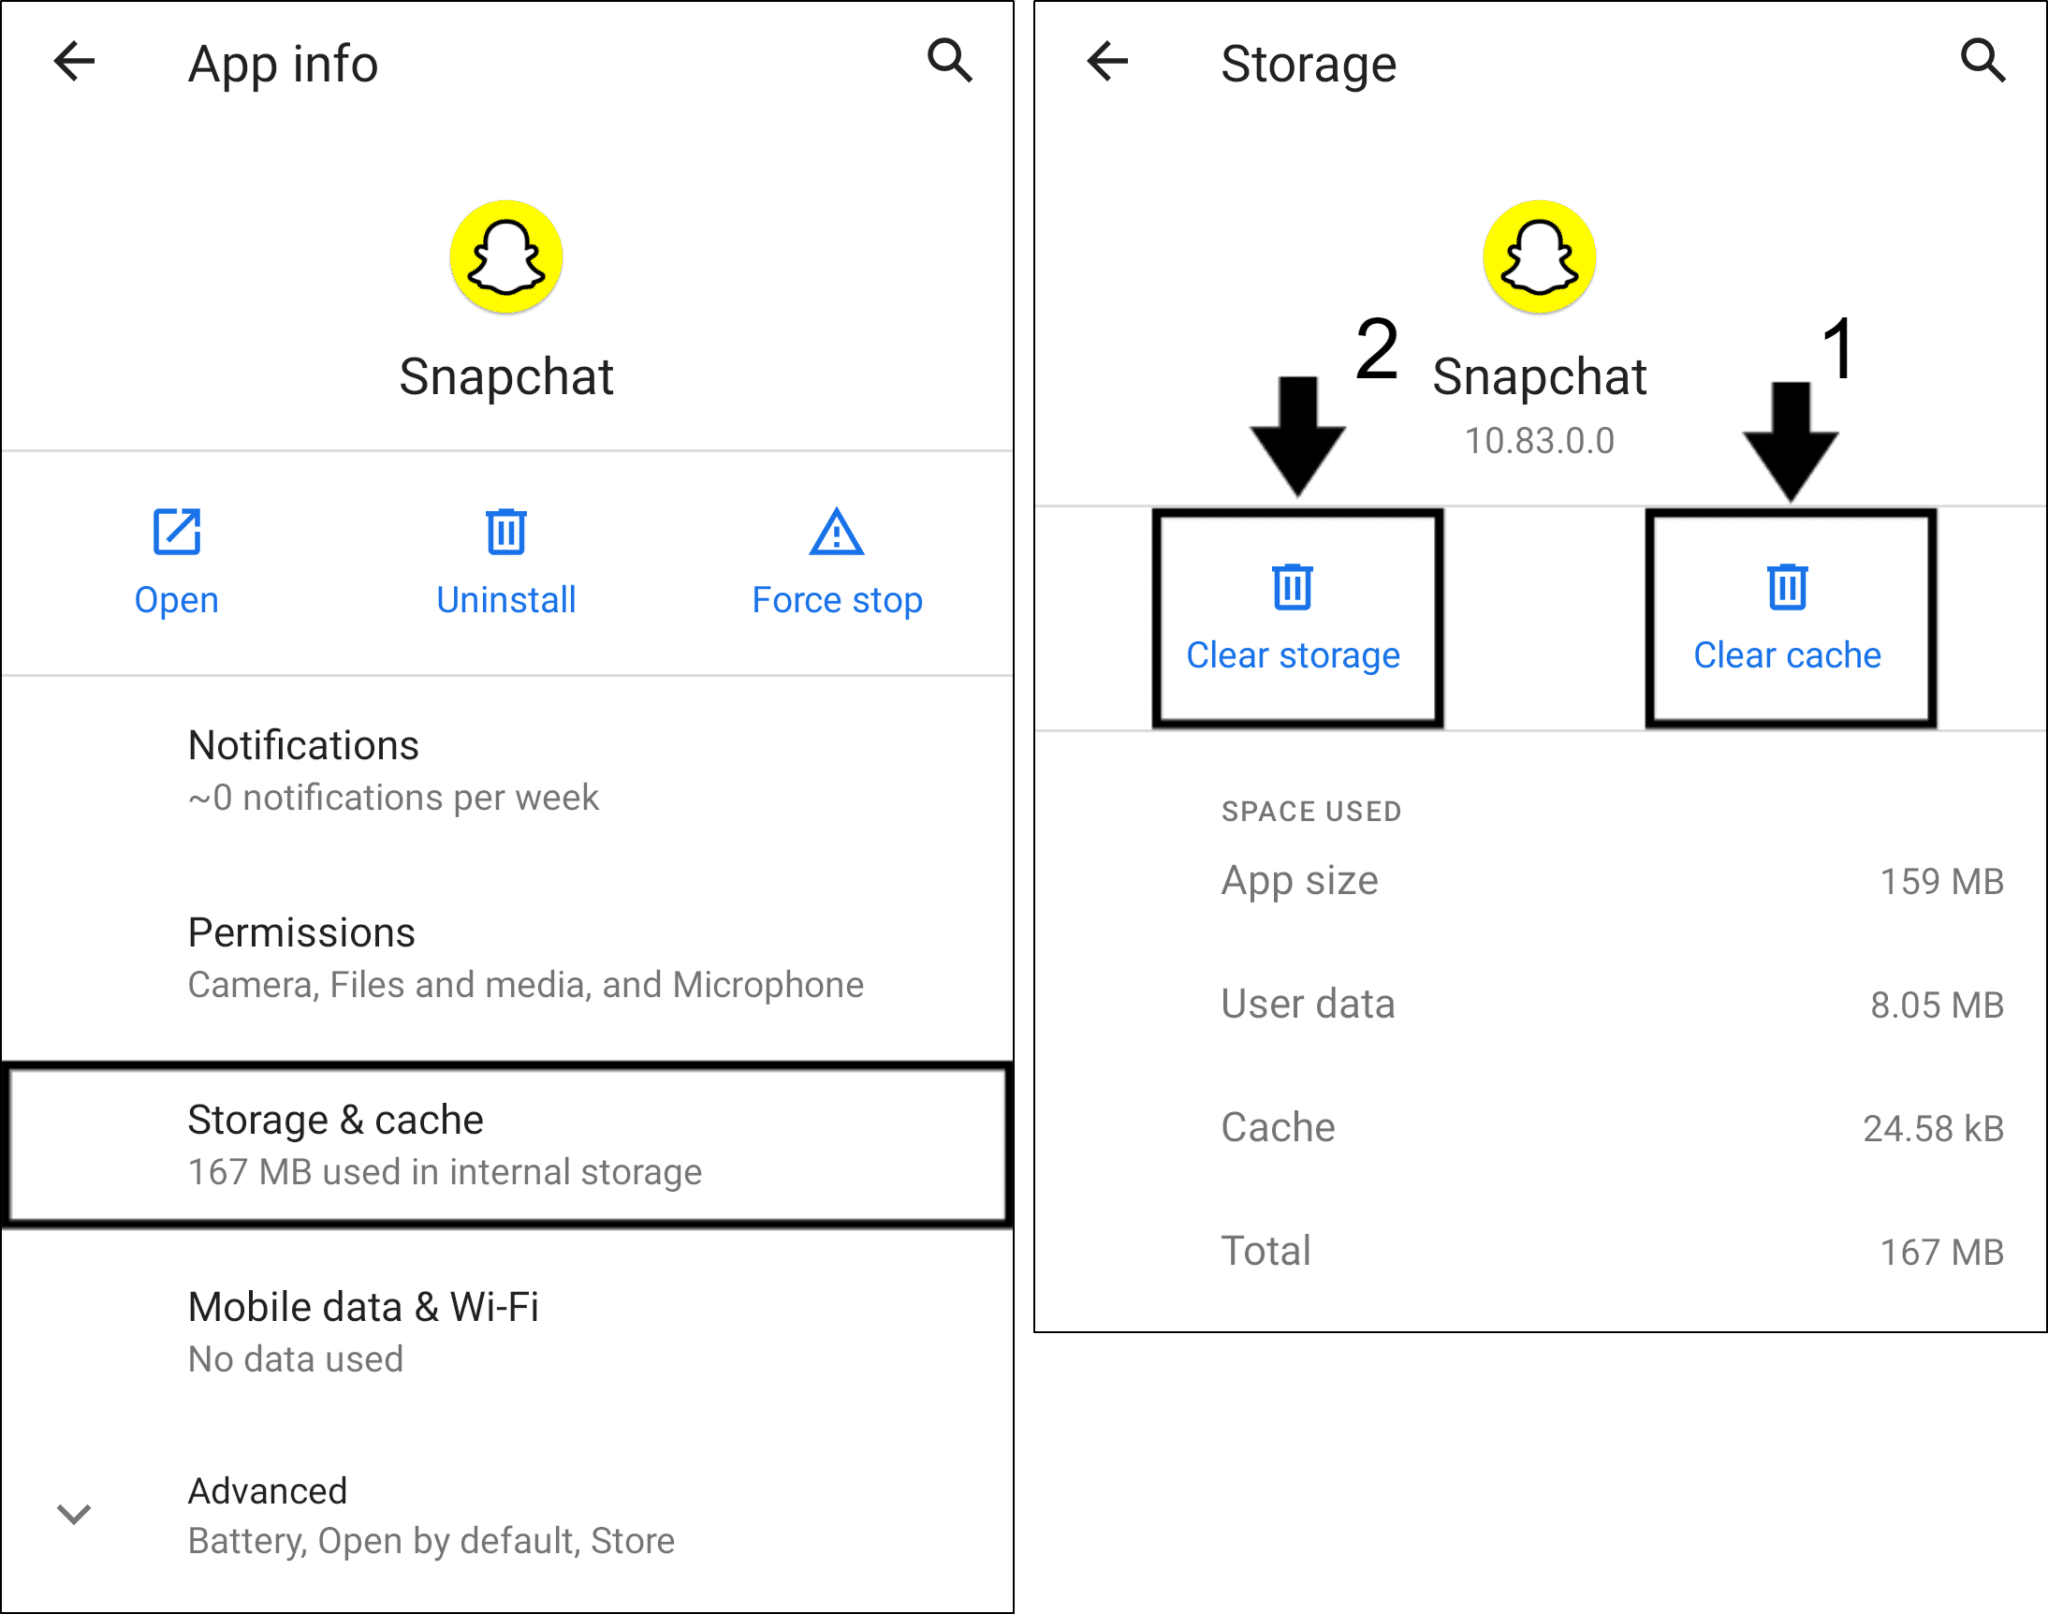 clear snapchat cache through Settings app on Android to fix stories or snaps not showing or loading